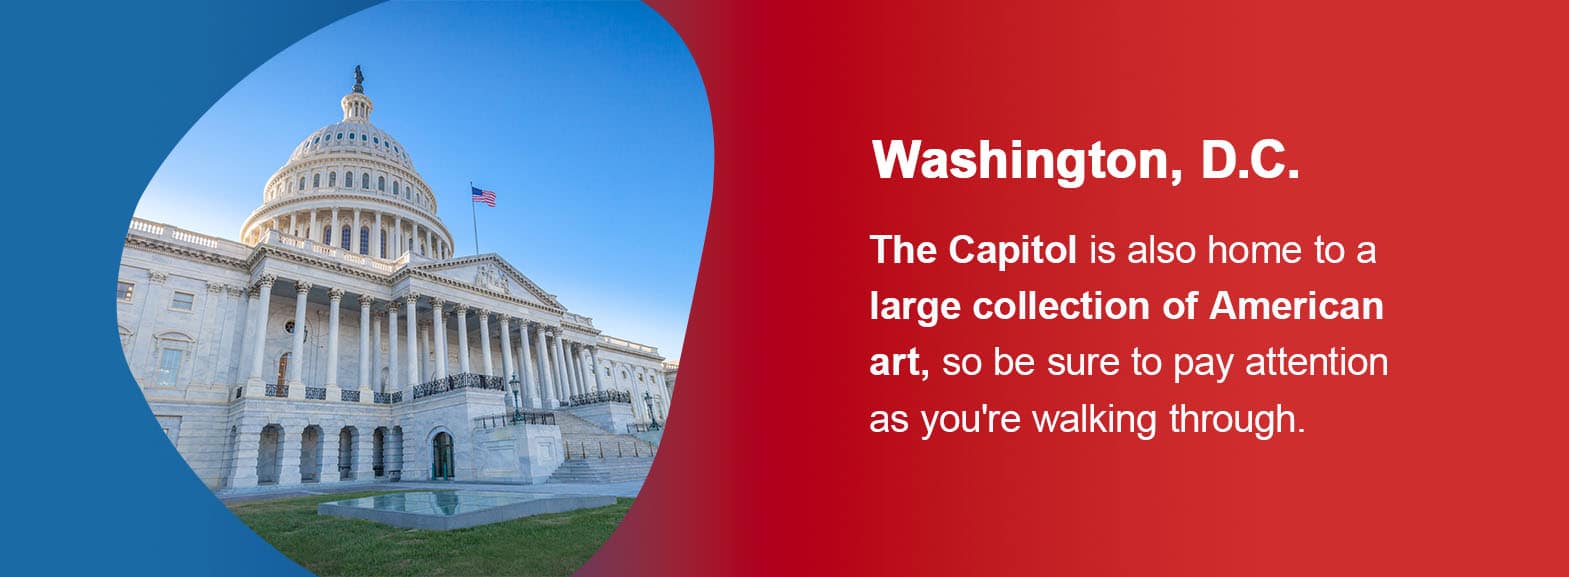 The Capitol is also home to a large collection of American art, so be sure to pay attention as you're walking through.